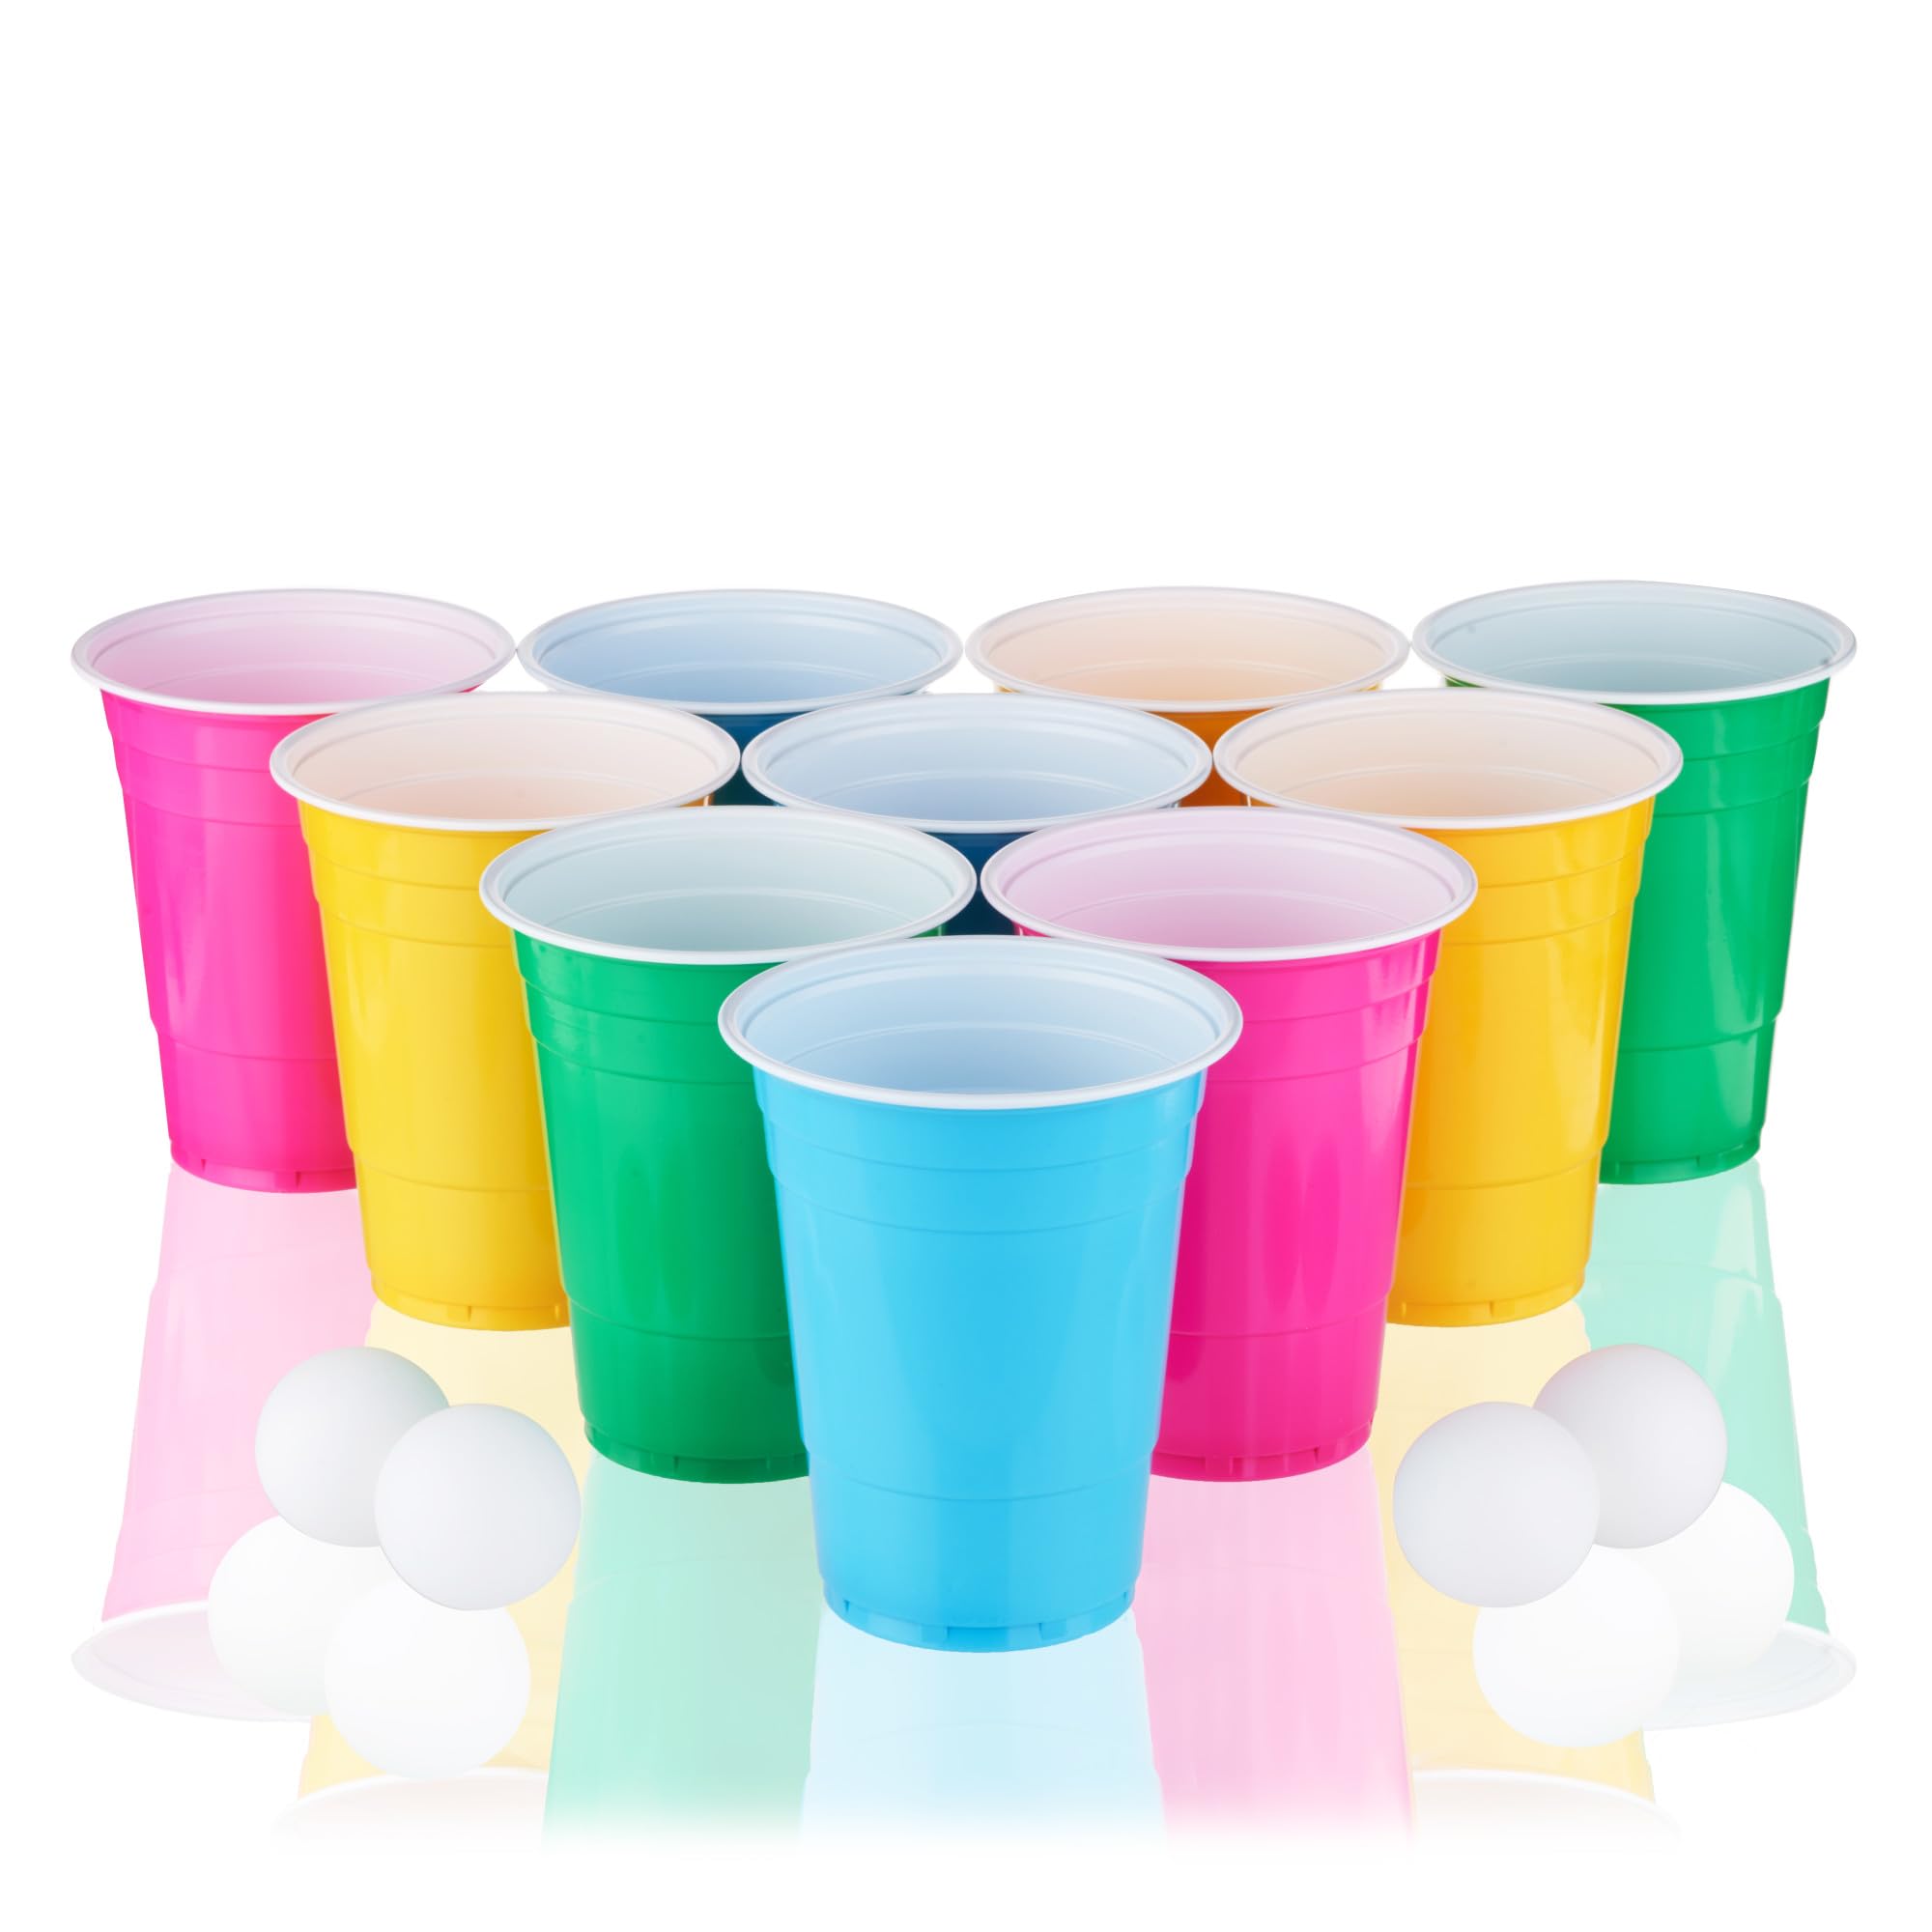 True Neon Kit, Beer Multicolor Set of 24 Cups and 4 Ping Pong Balls, Set of 1, Assorted